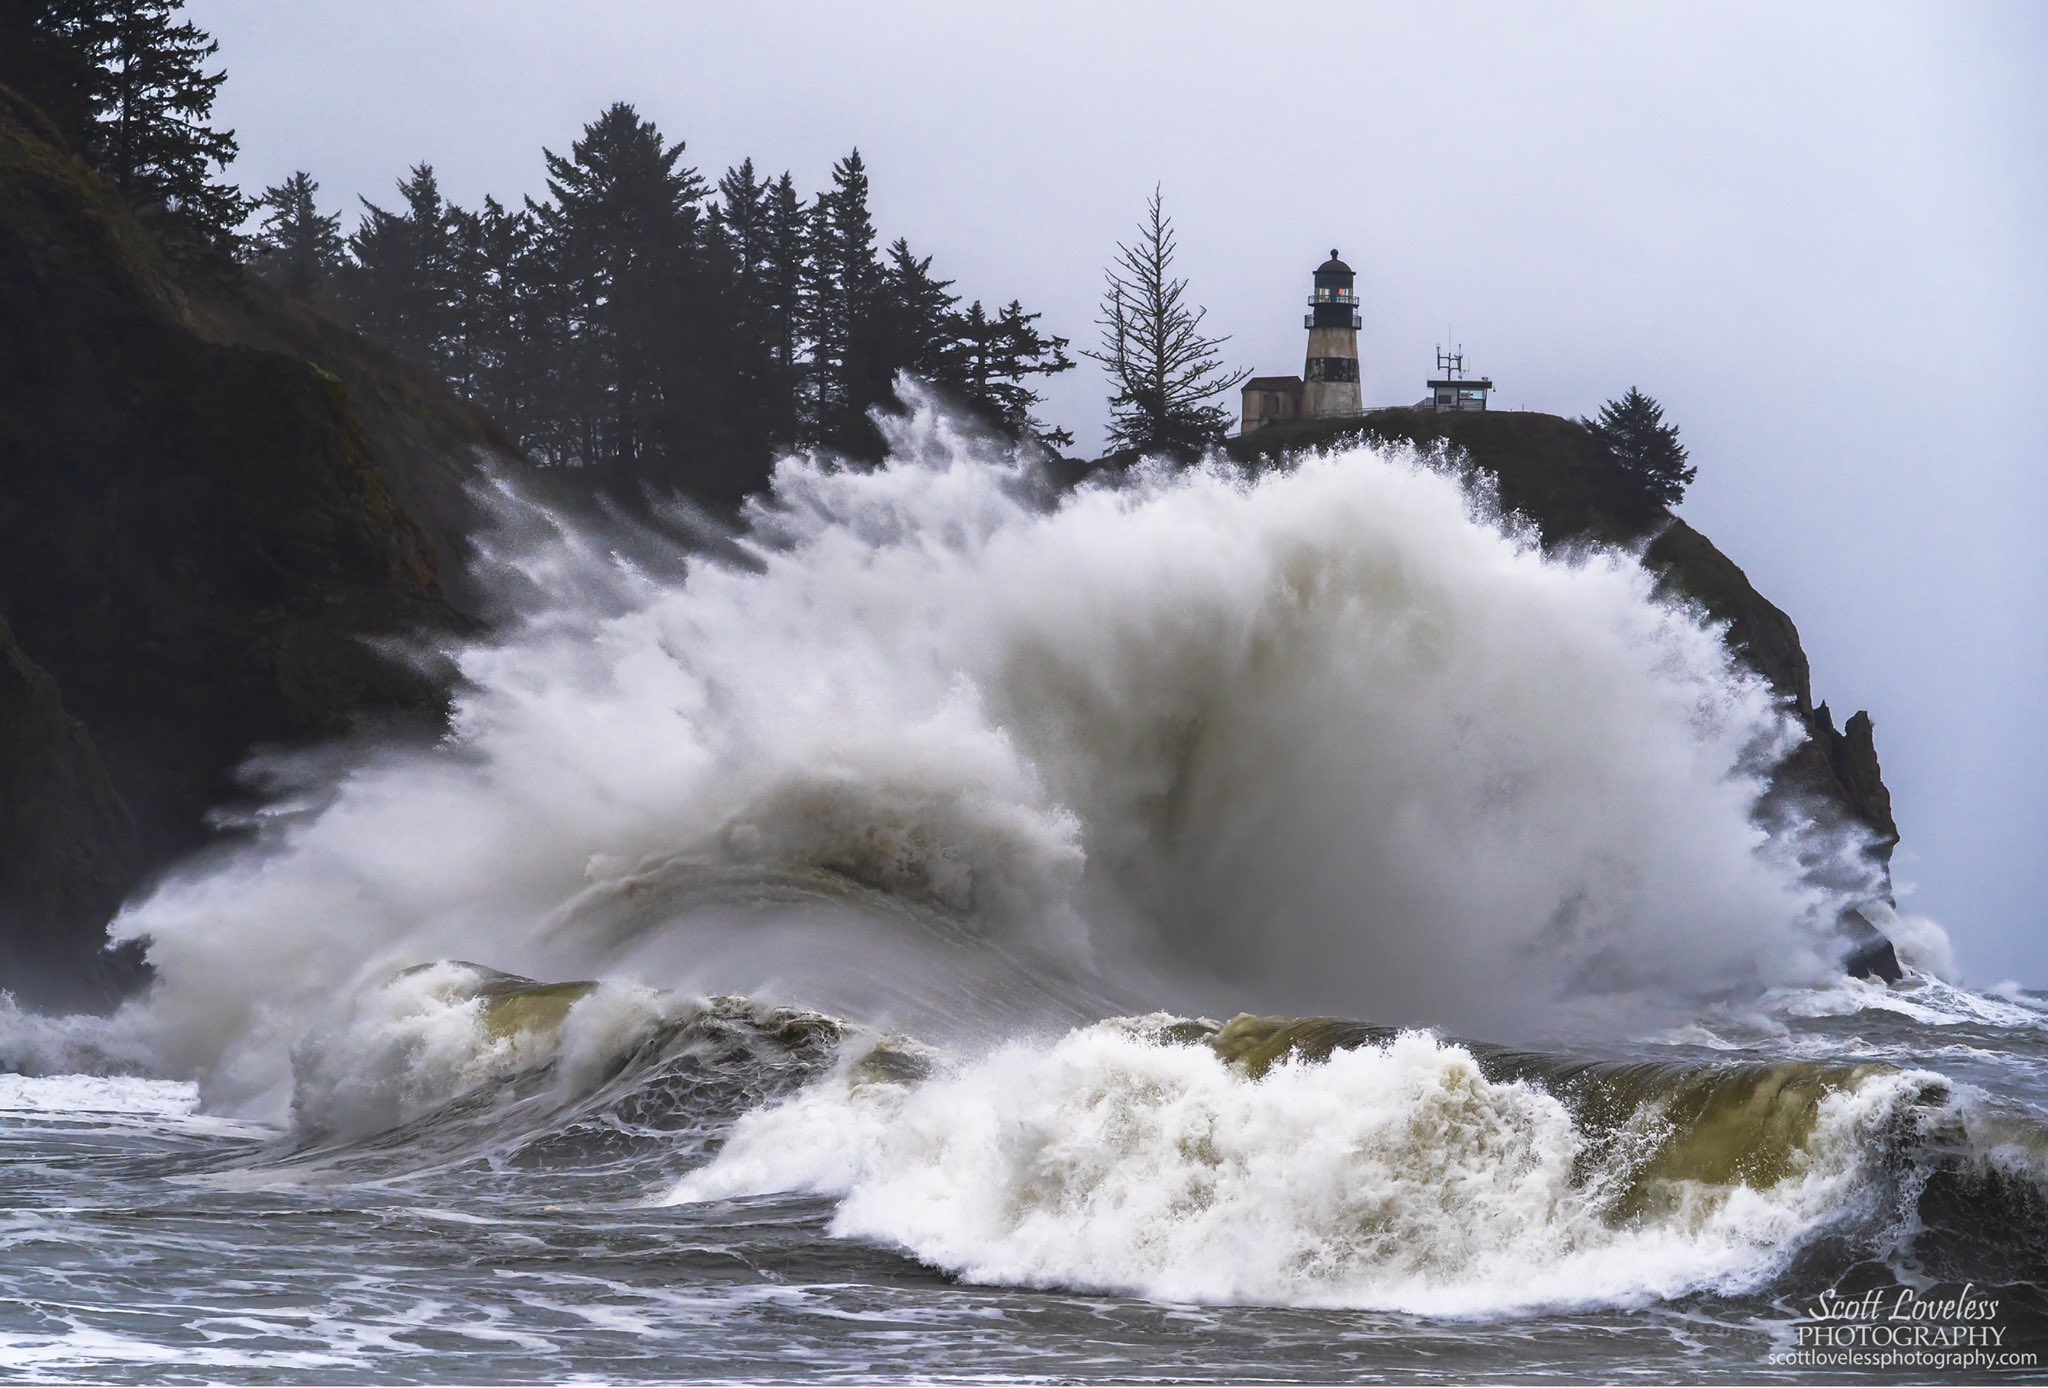 1st Place Huge waves at Cape Disappointment in WA state by Scott Loveless Photography @SLovelessPhoto